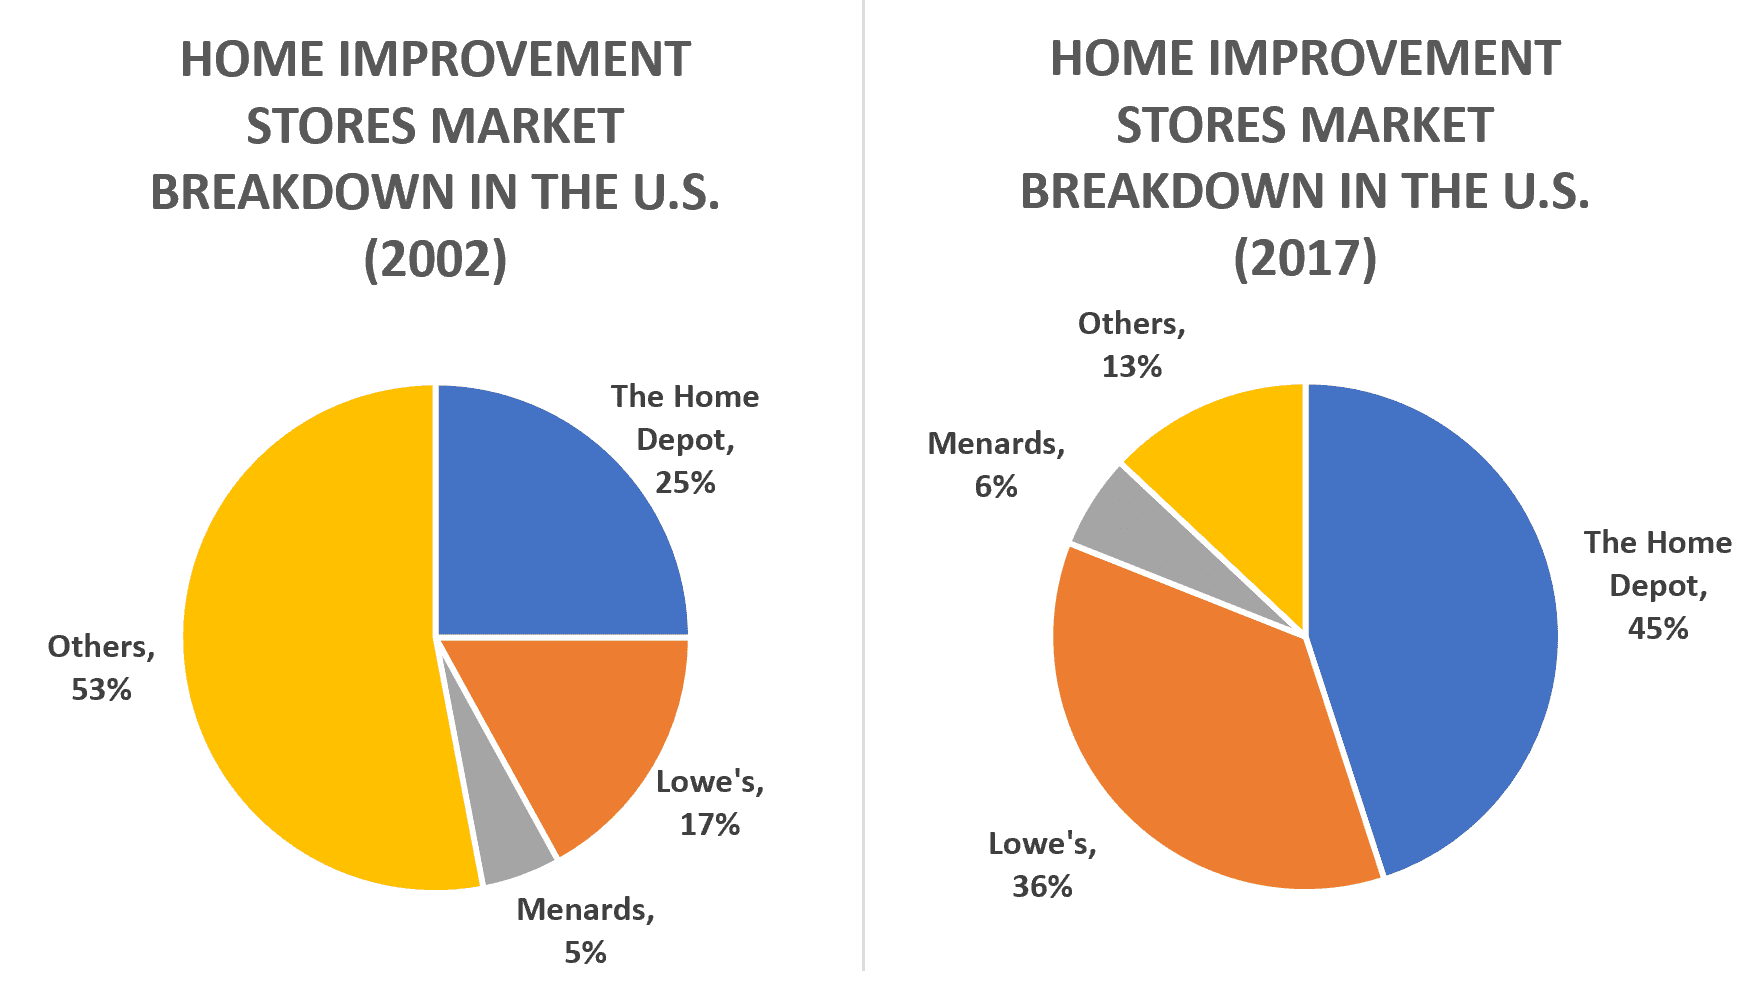 The U.S. Duopoly of Home Improvement The Home Depot vs Lowe’s